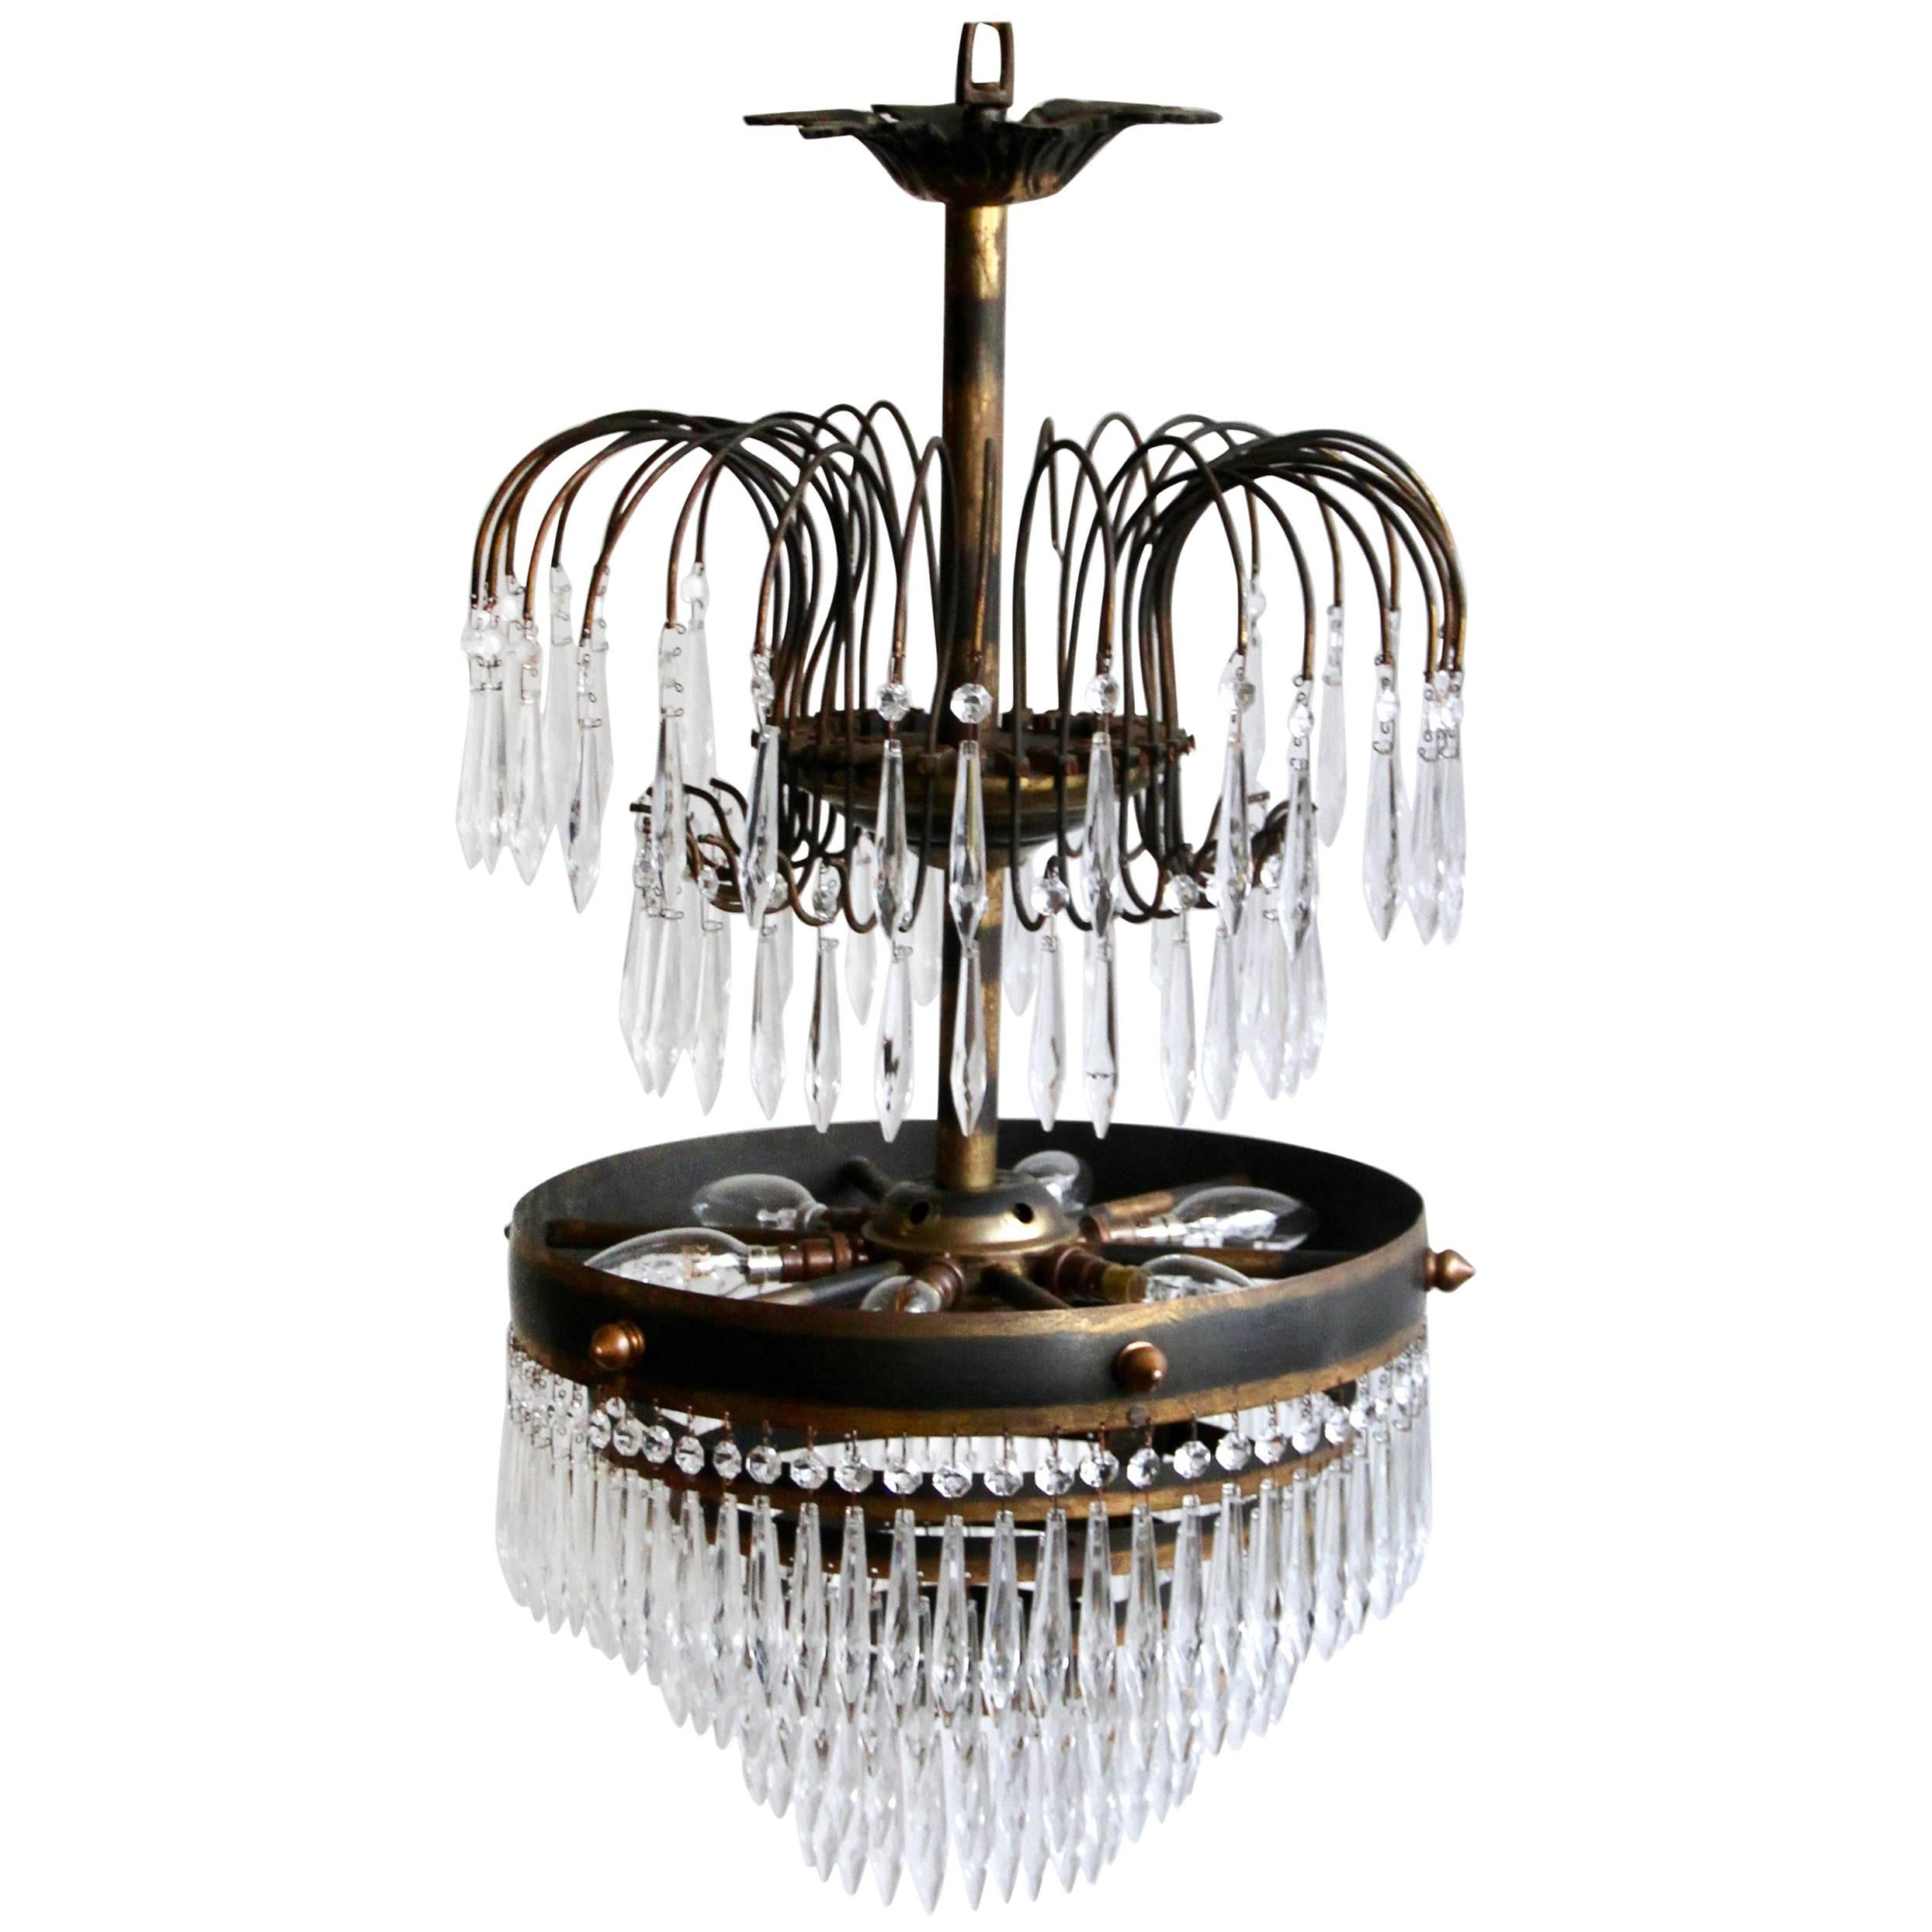 Early 20th Century Waterfall Chandelier Dressed in Glass Icicle Drops